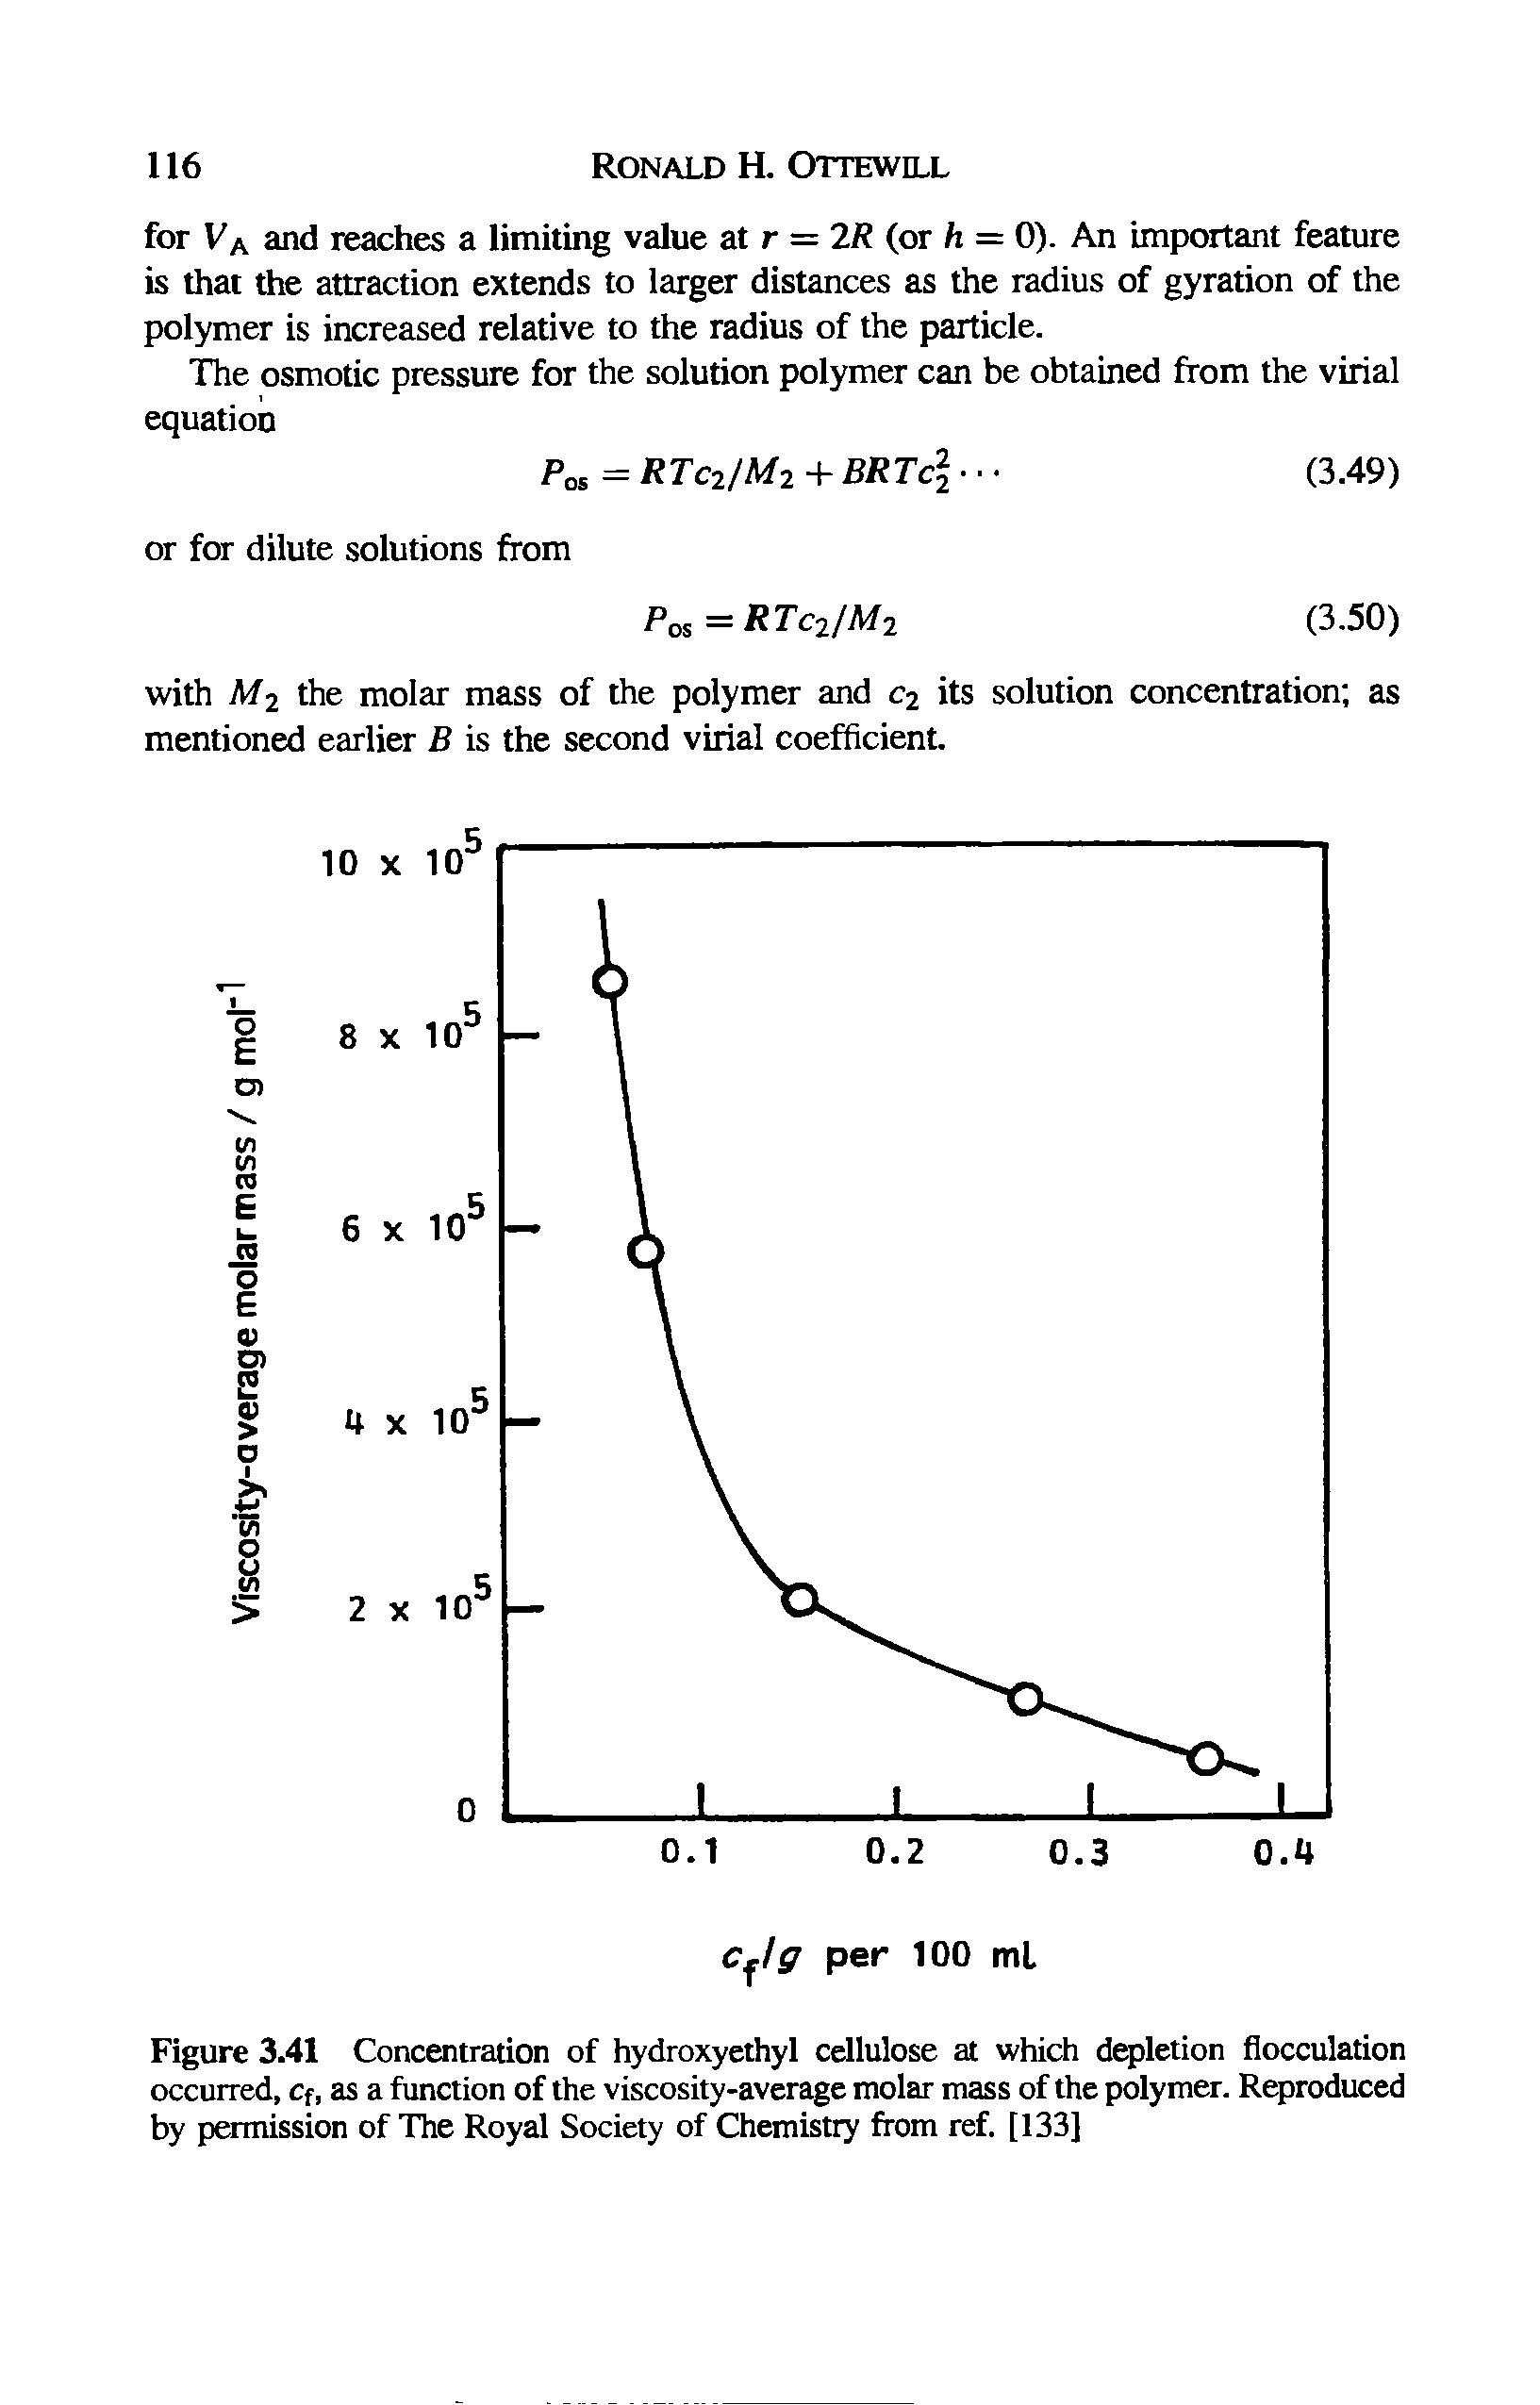 Figure 3.41 Concentration of hydroxyethyl cellulose at which depletion flocculation occurred, Cf, as a function of the viscosity-average molar mass of the polymer. Reproduced by permission of The Royal Society of Chemistry from ref. [133]...